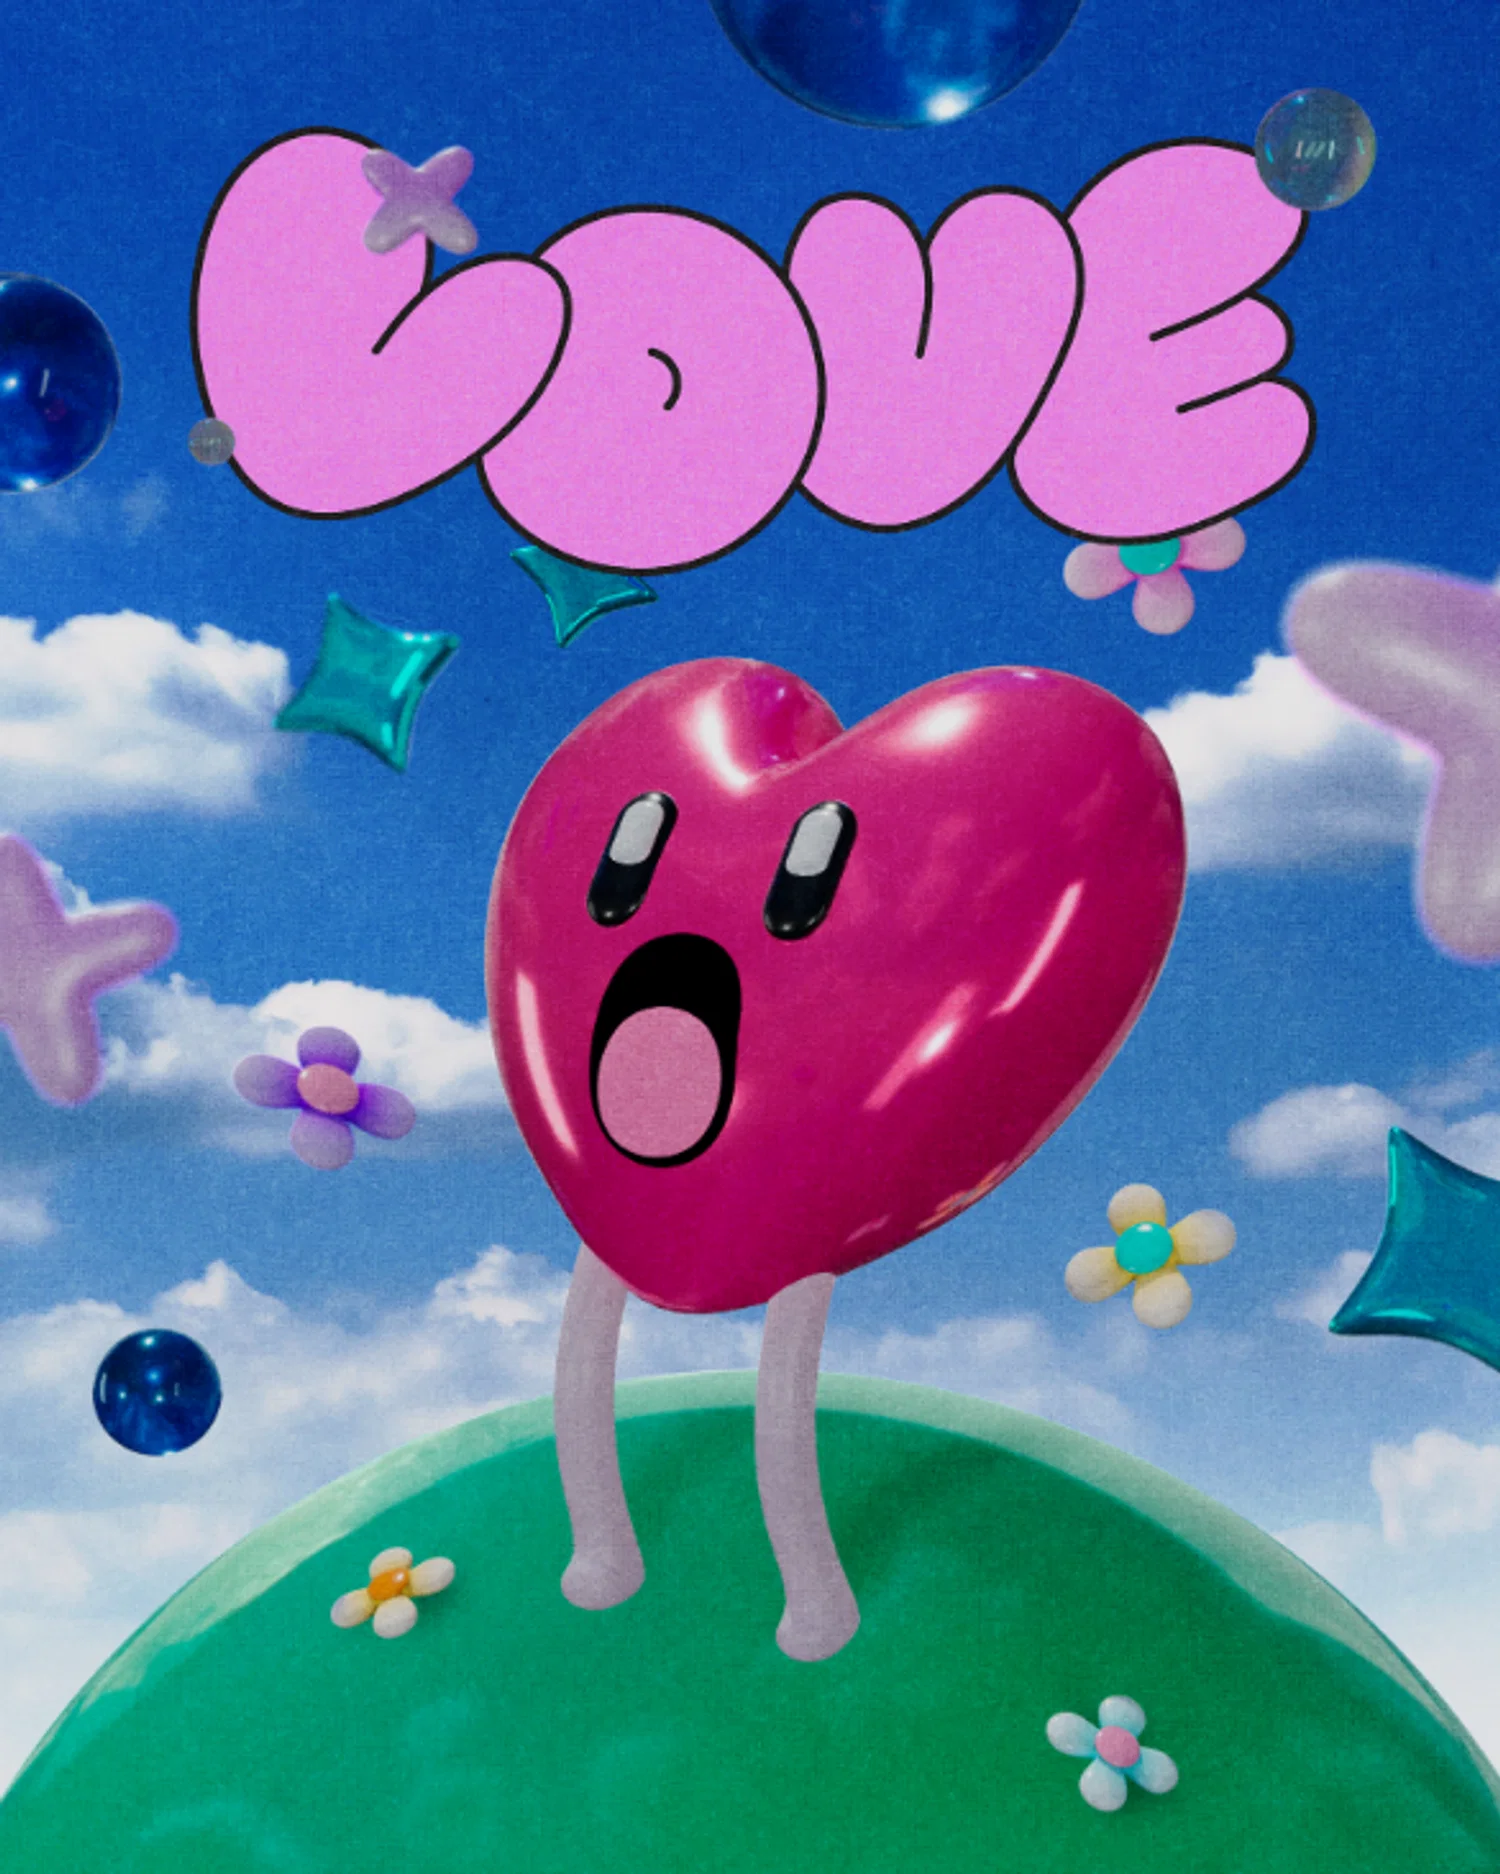 3D Graphic Poster with Heart Character and Bright Colors